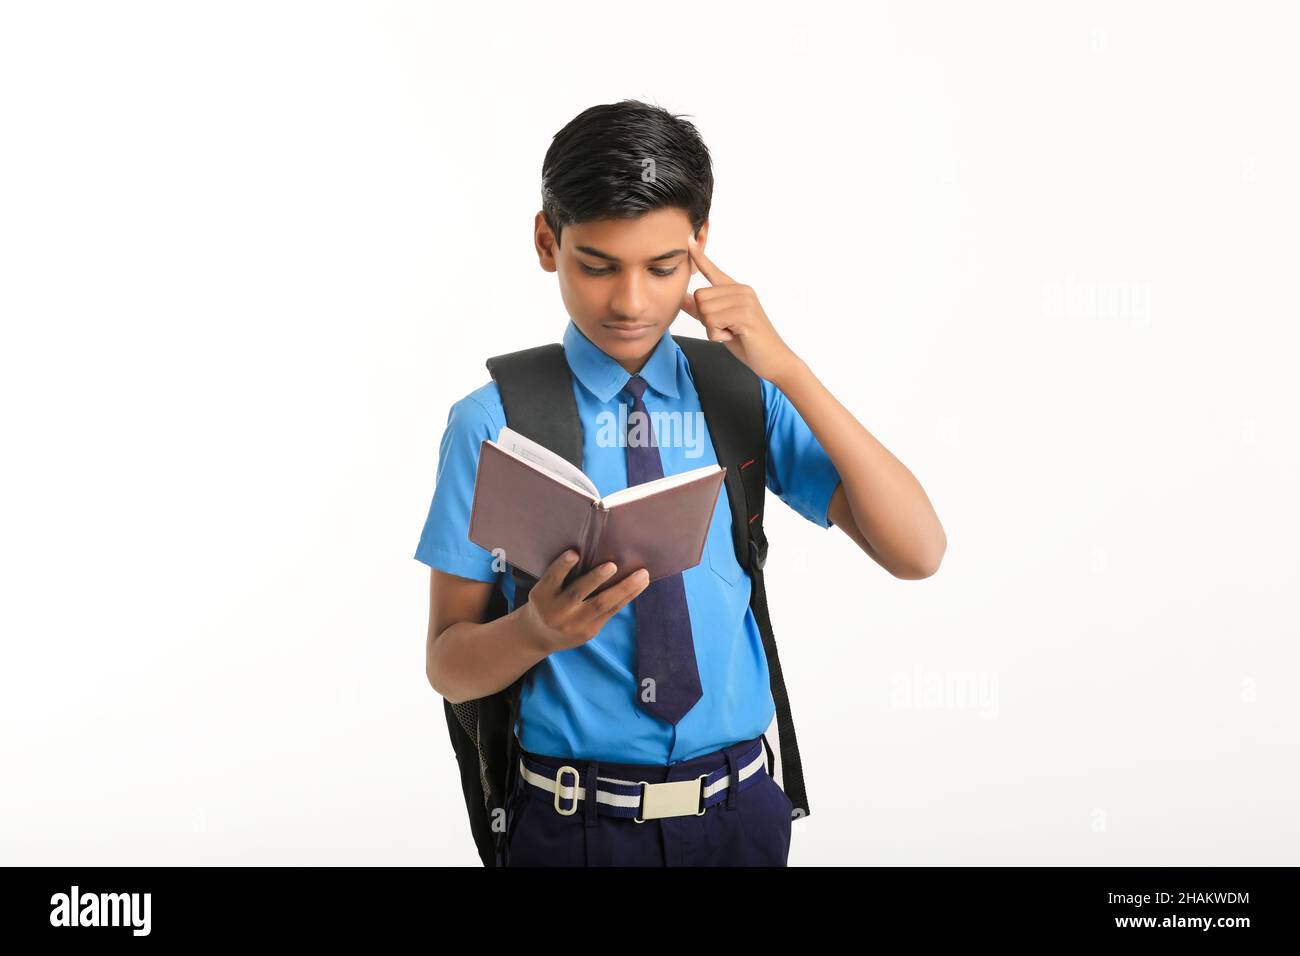 Indian school boy in uniform and reading diary on white background. Stock Photo